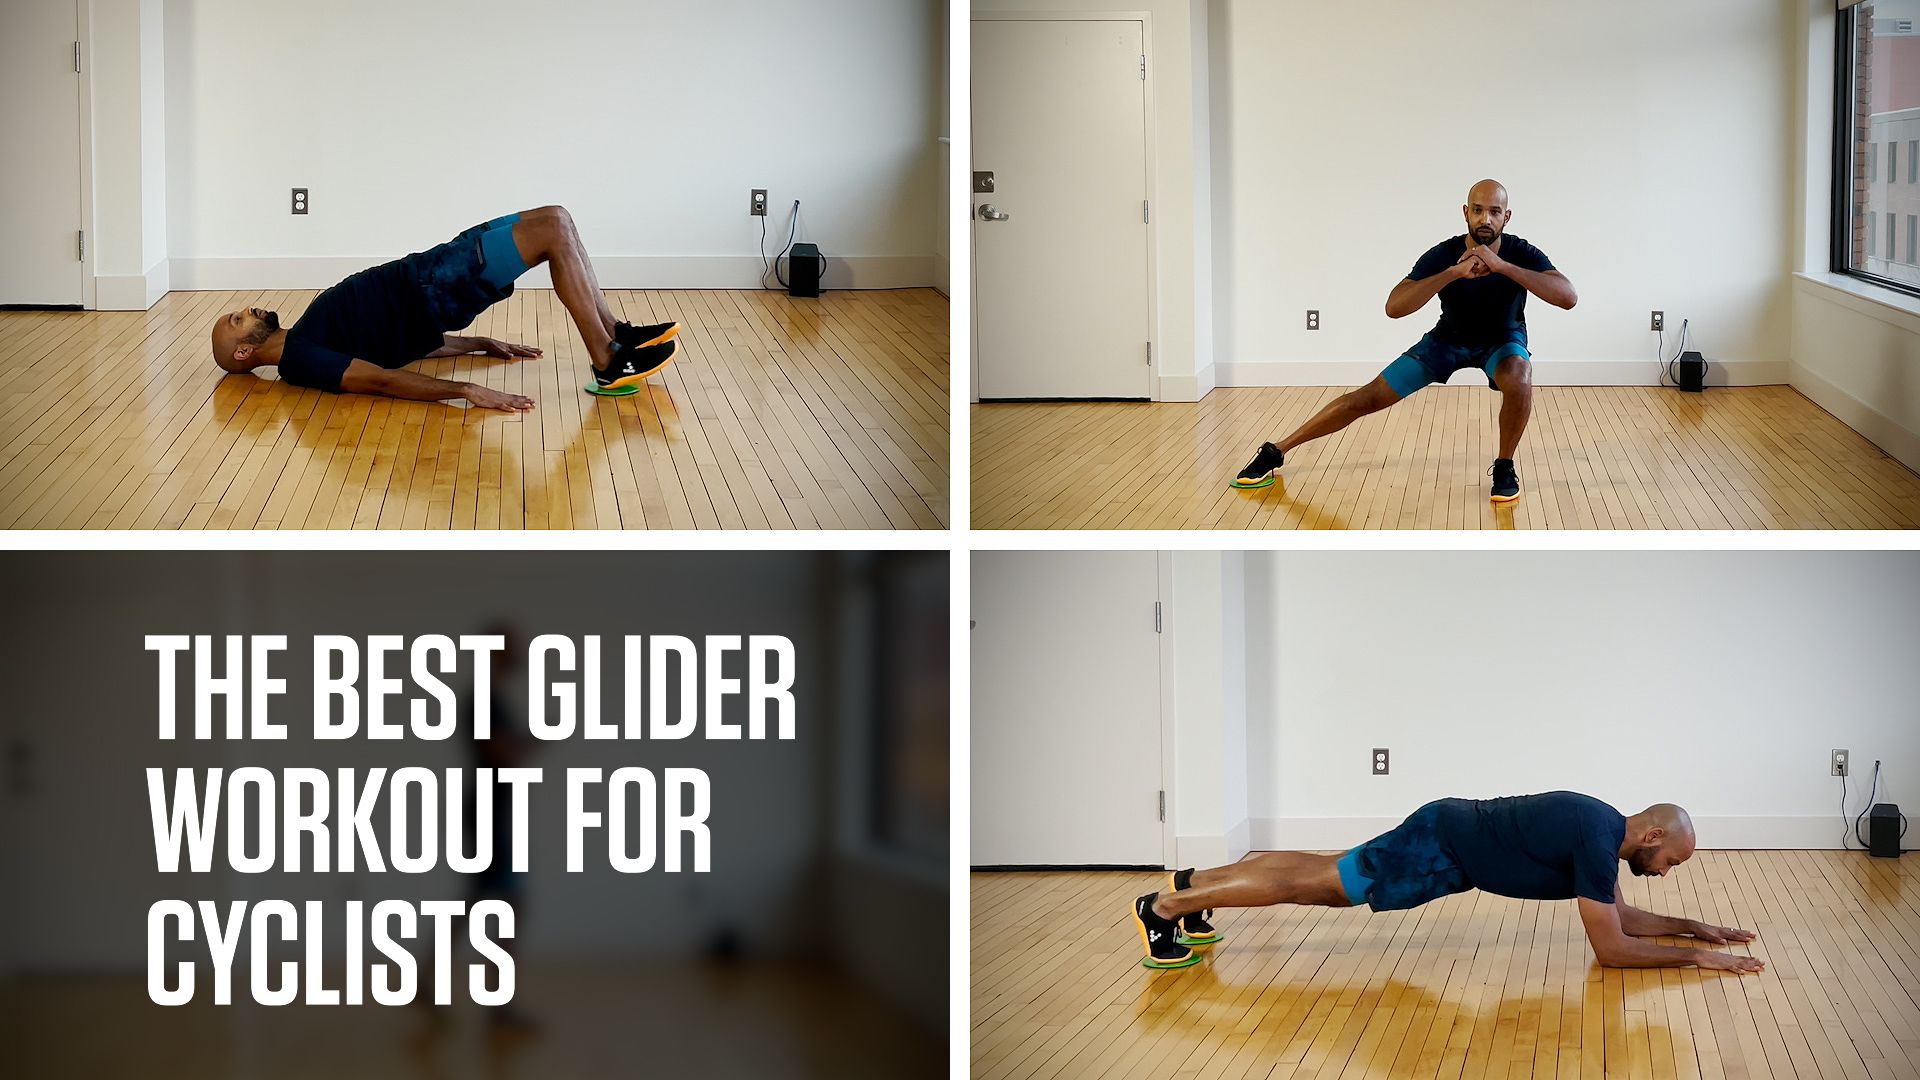 Core Training and More With DIY Gliders 